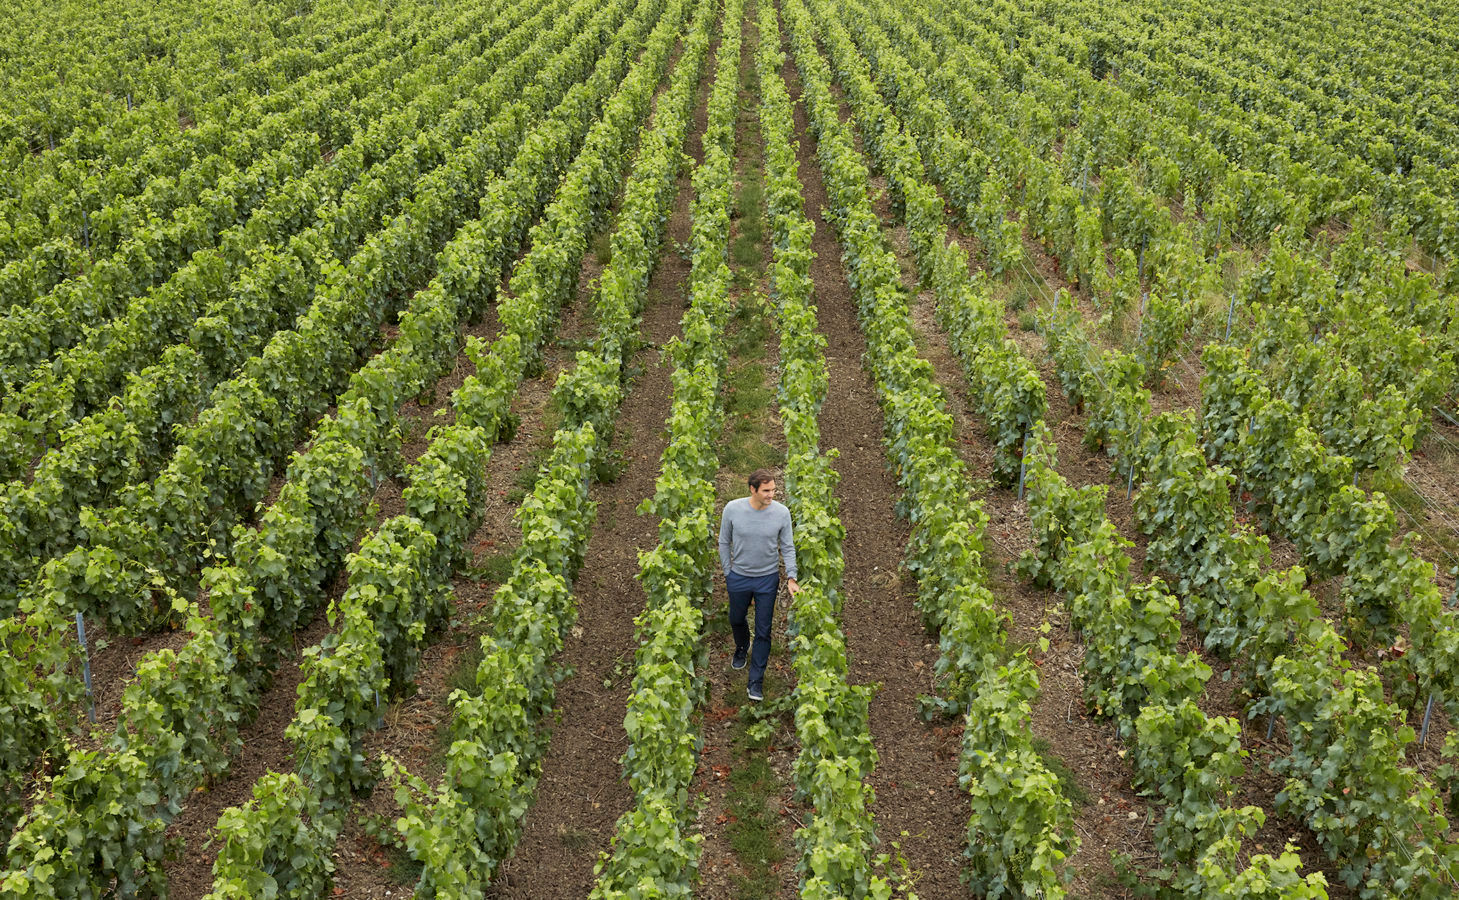 LSA Exclusive: Roger Federer finds out how much water Moët & Chandon’s vineyard needs